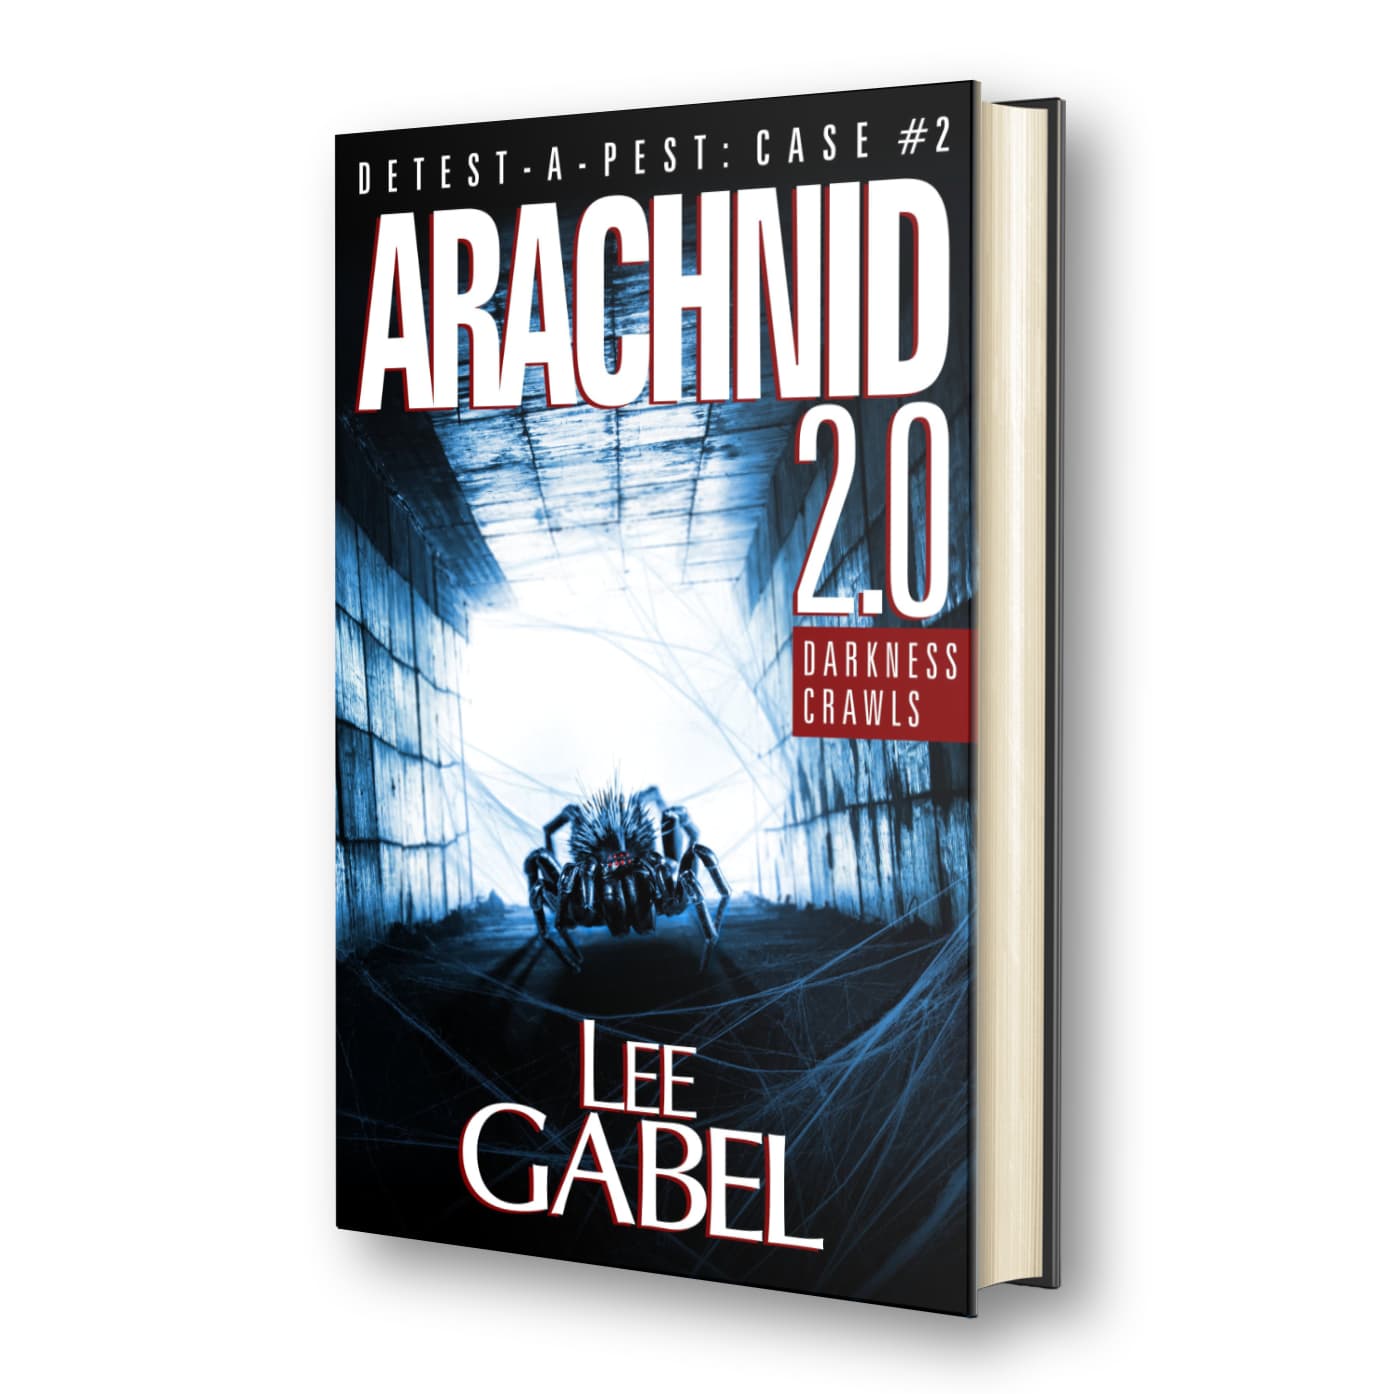 Arachnid 2.0 virtual hardcover image (512 pages.)